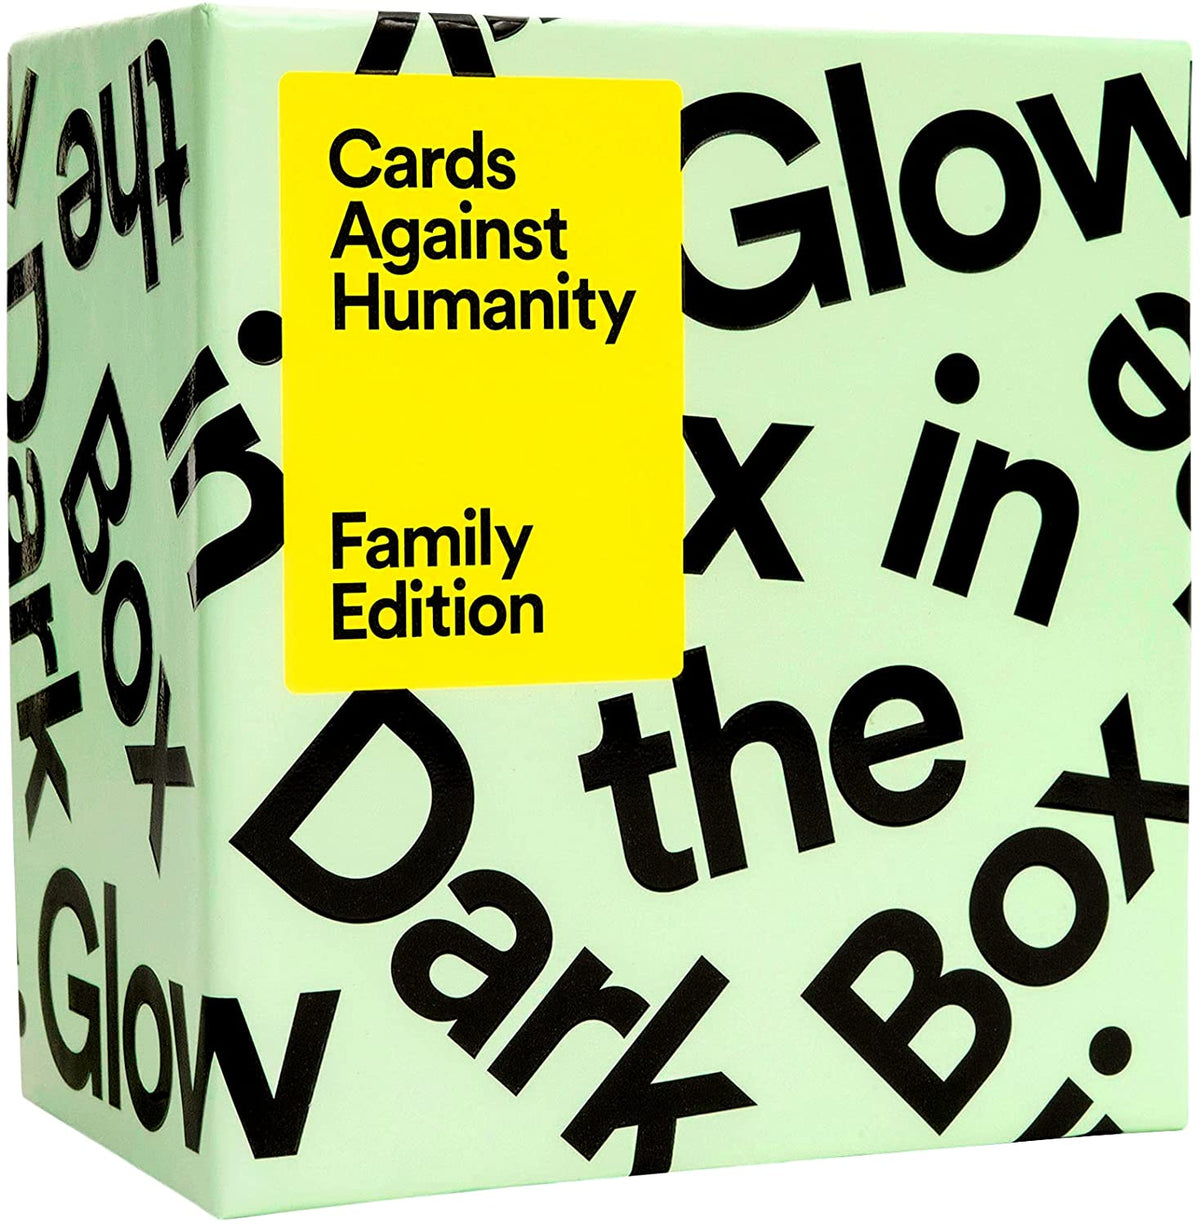 Cards Against Humanity - Family Edition: First Expansion (Glow in the Dark Box)